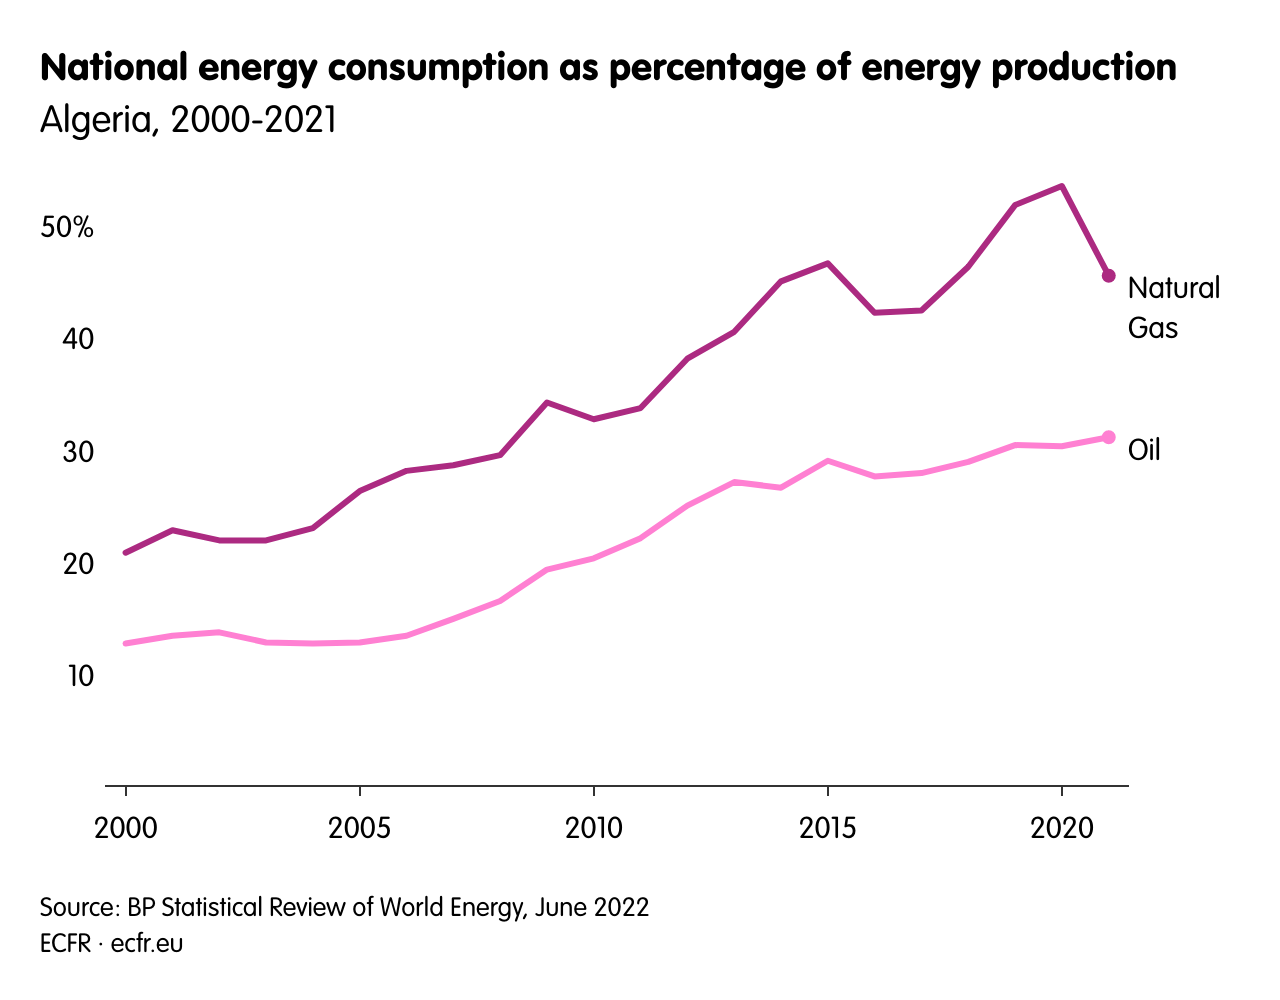 National energy consumption as a percentage of energy production